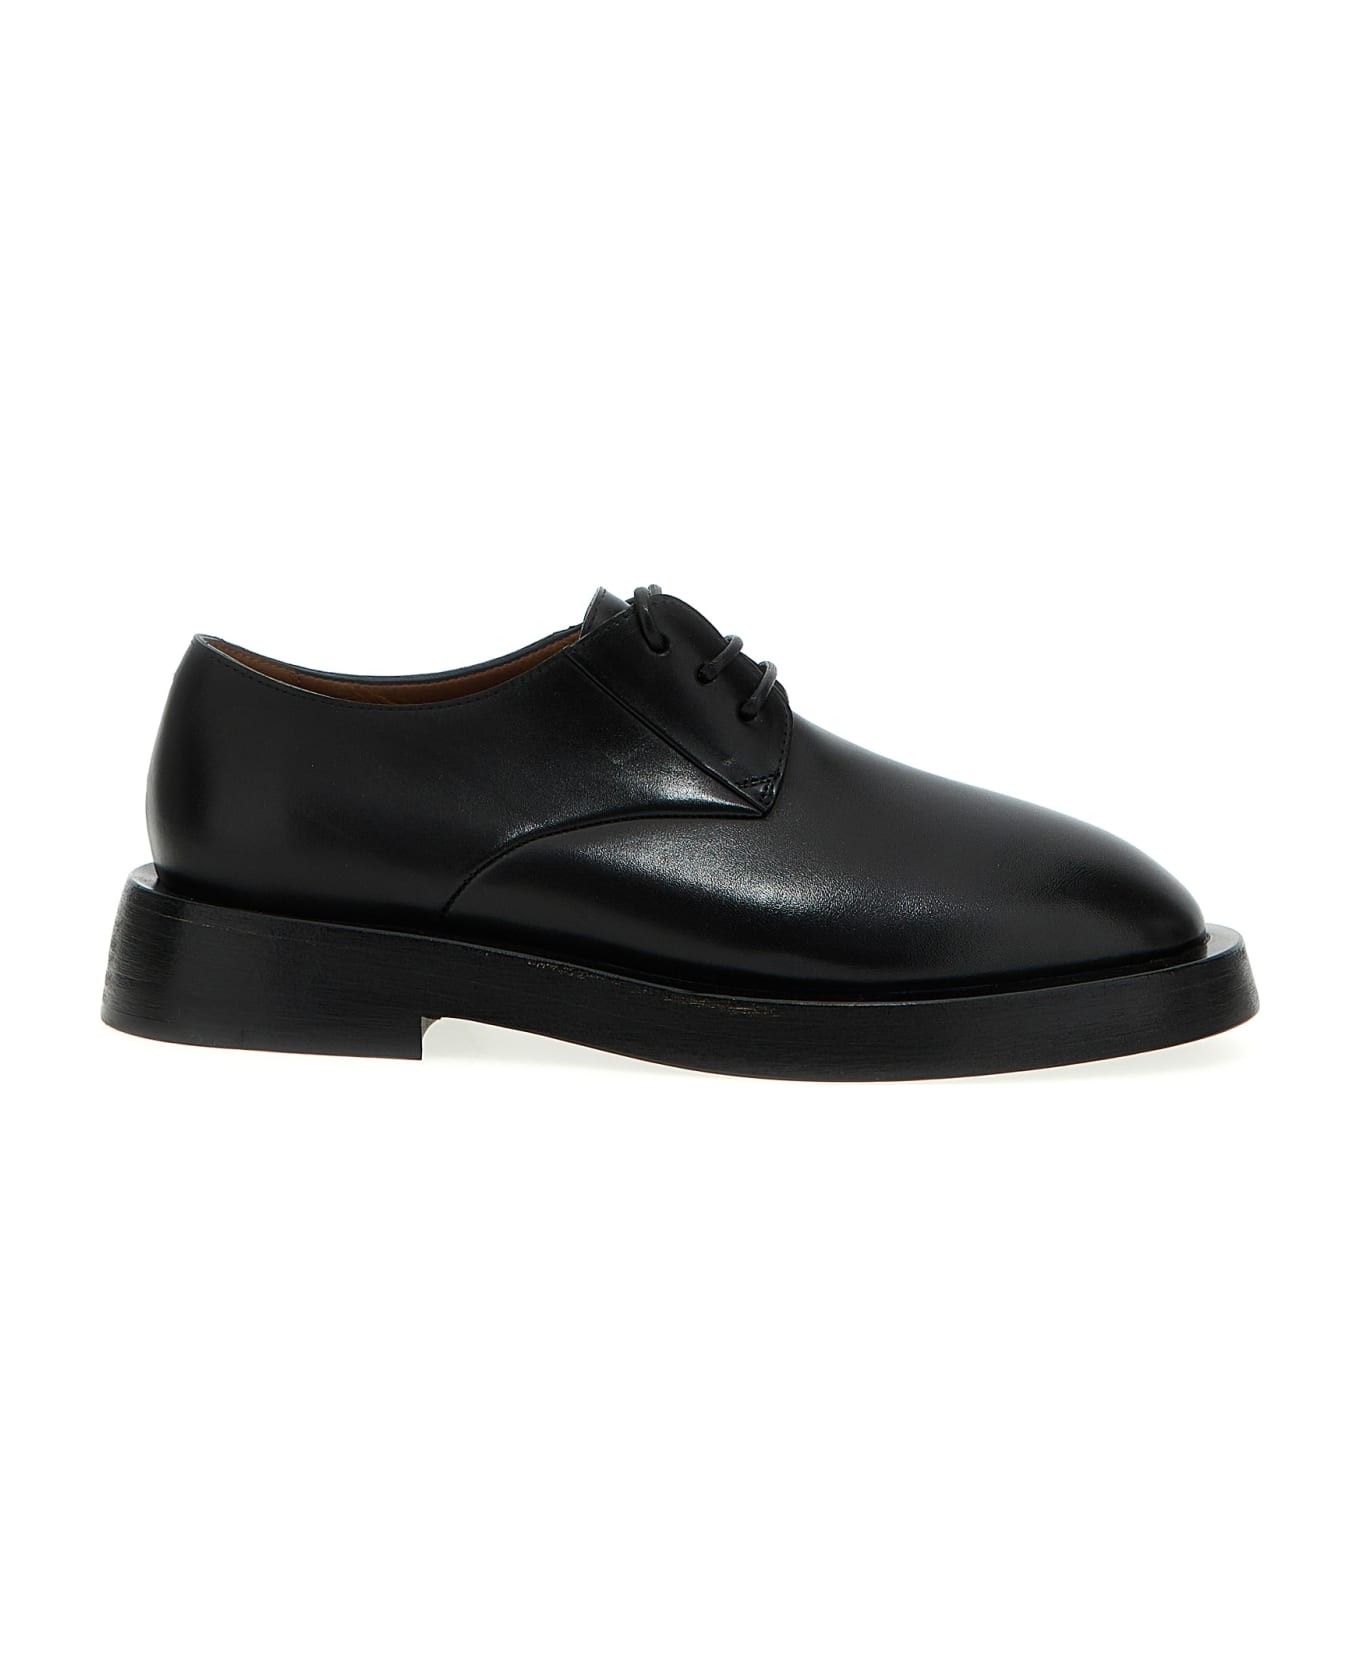 Marsell Mentone Derby Shoes - Black  